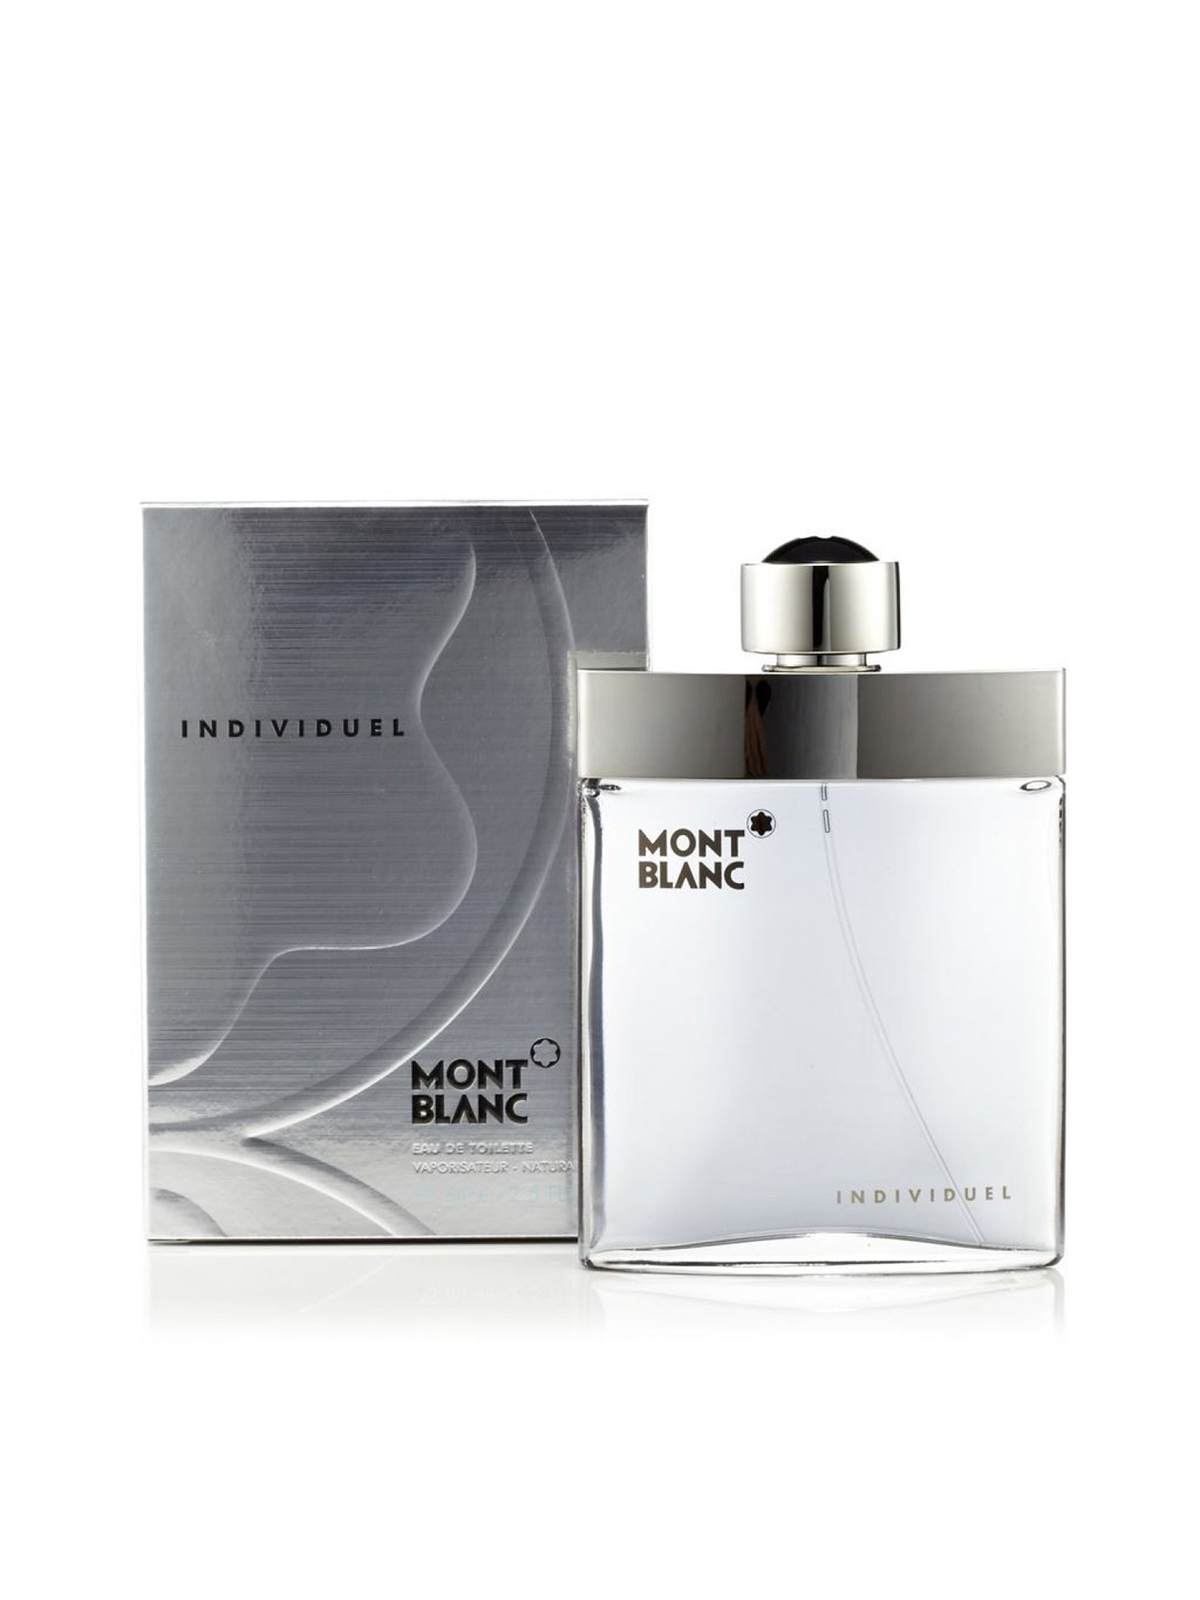 INDIVIDUEL BY MONT BLANC